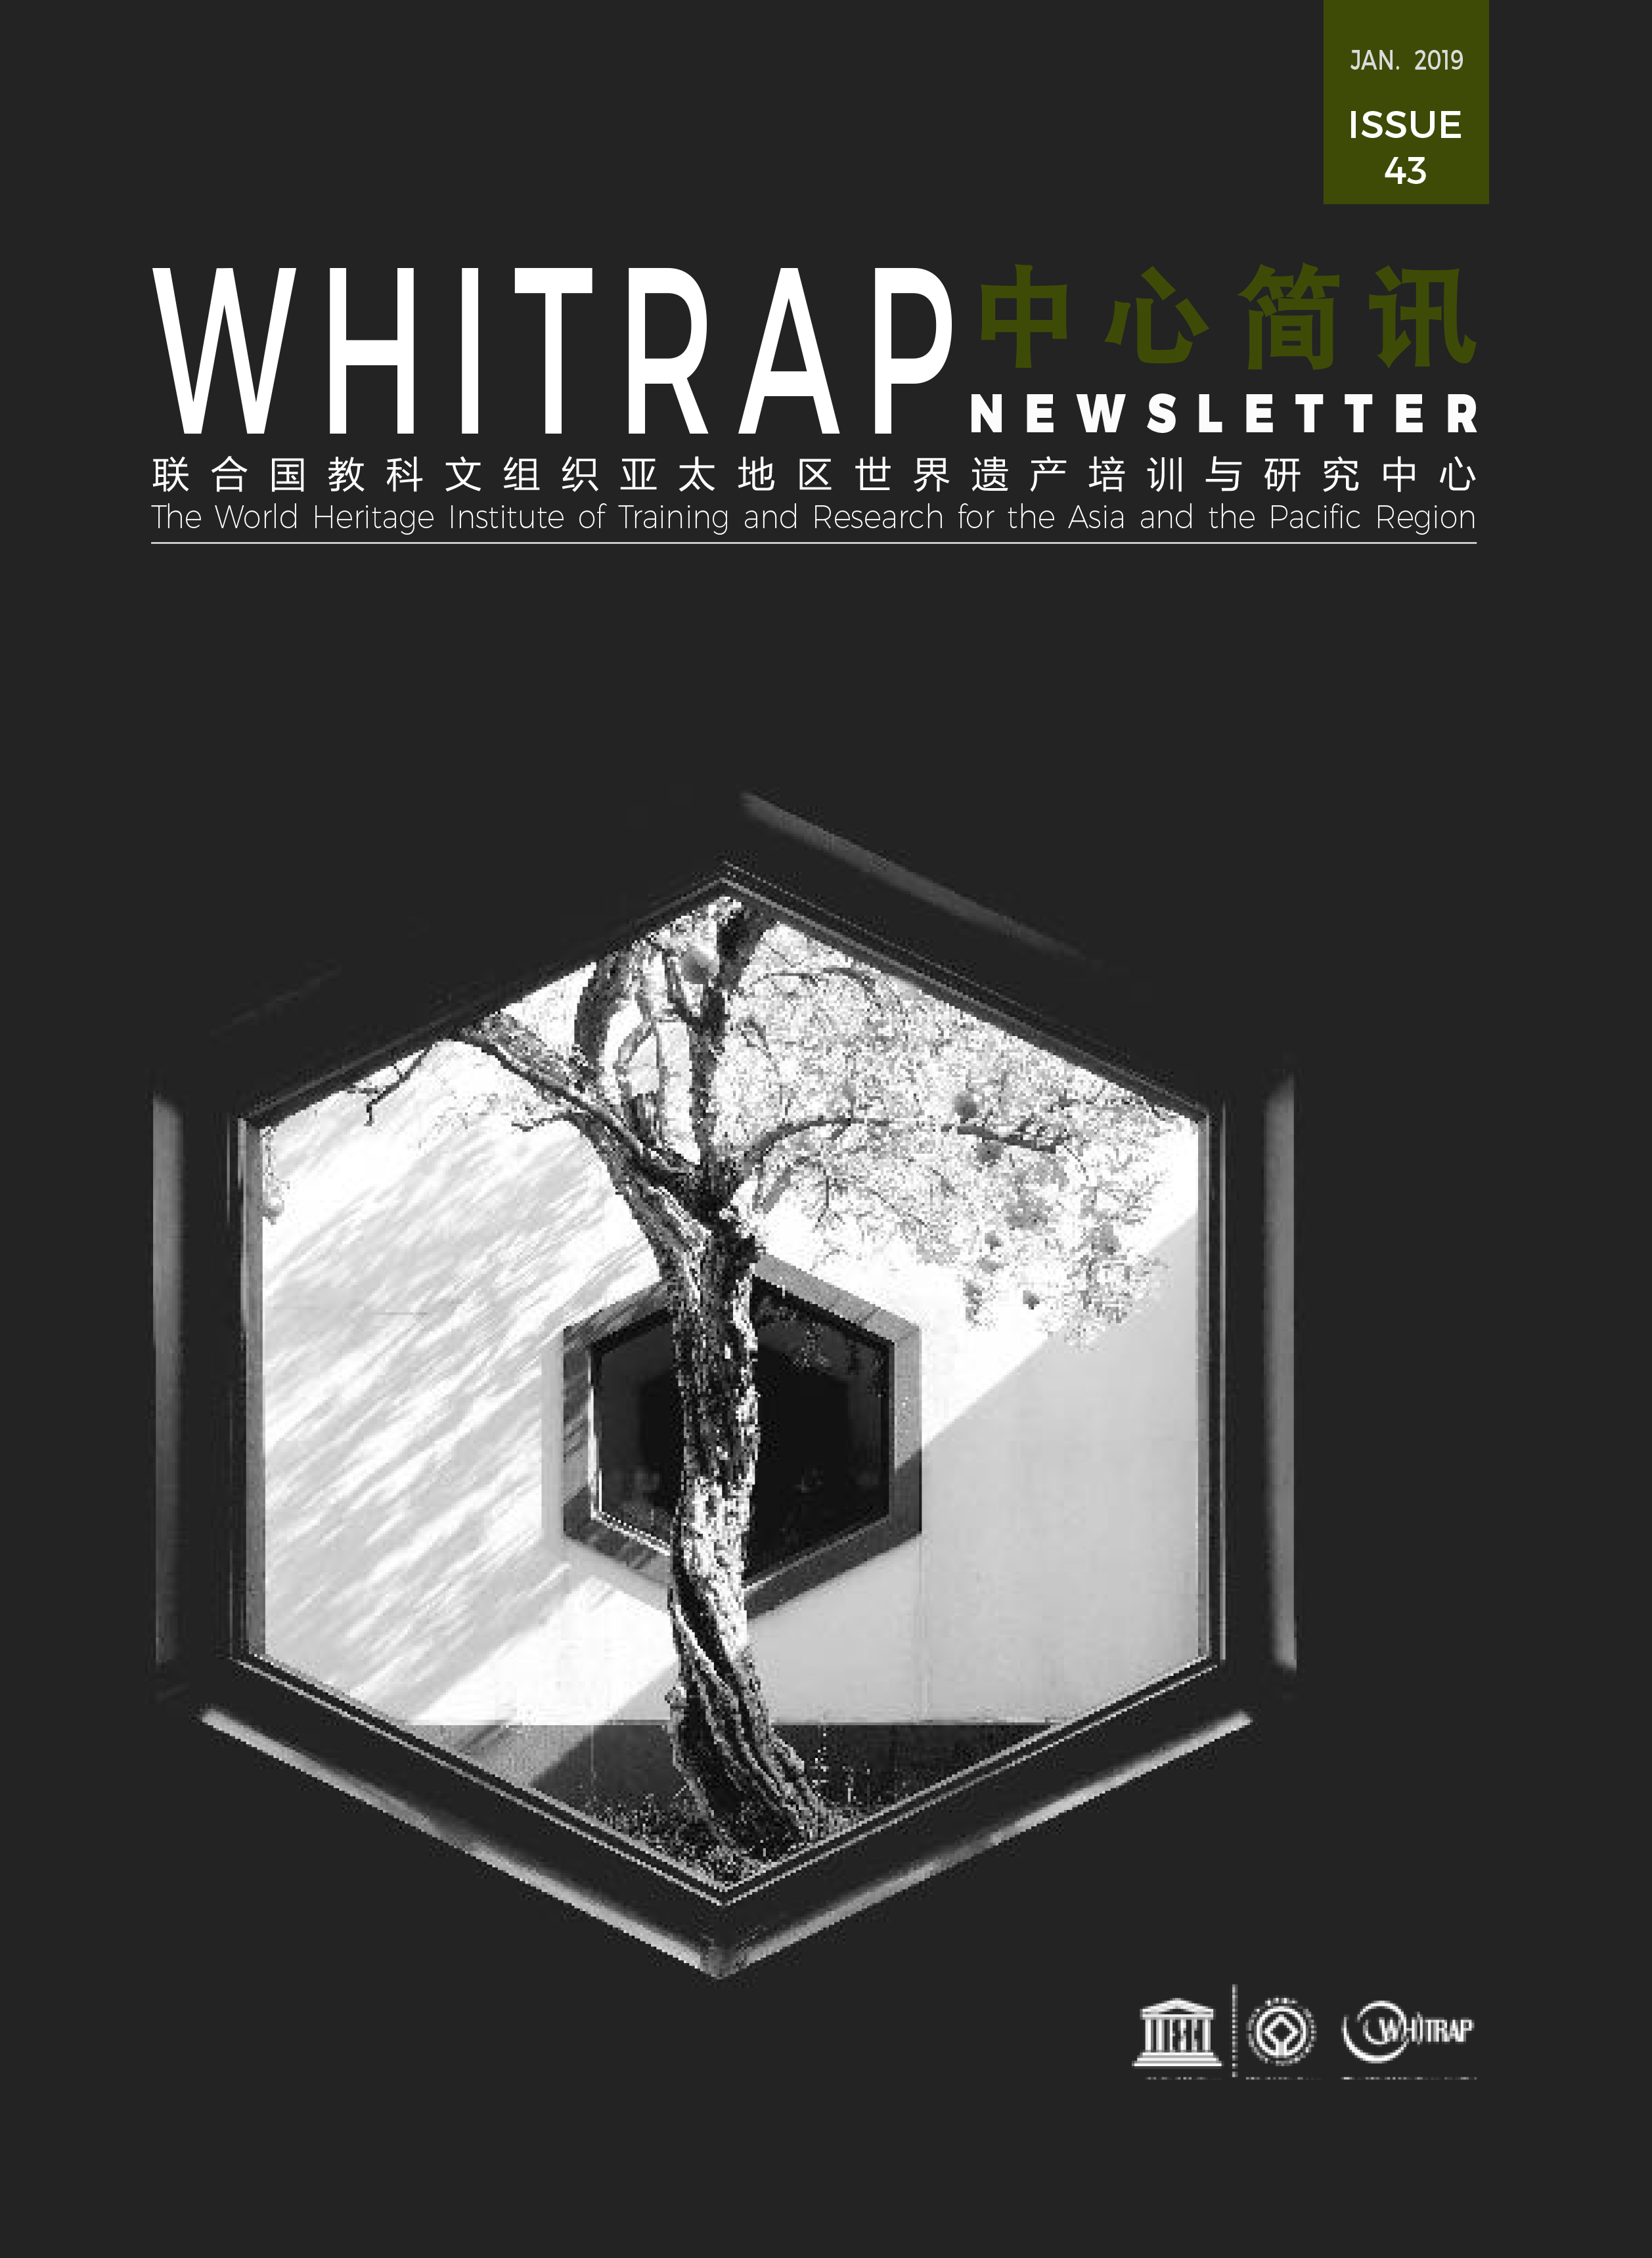 WHITRAP Newsletter (Issue 43)